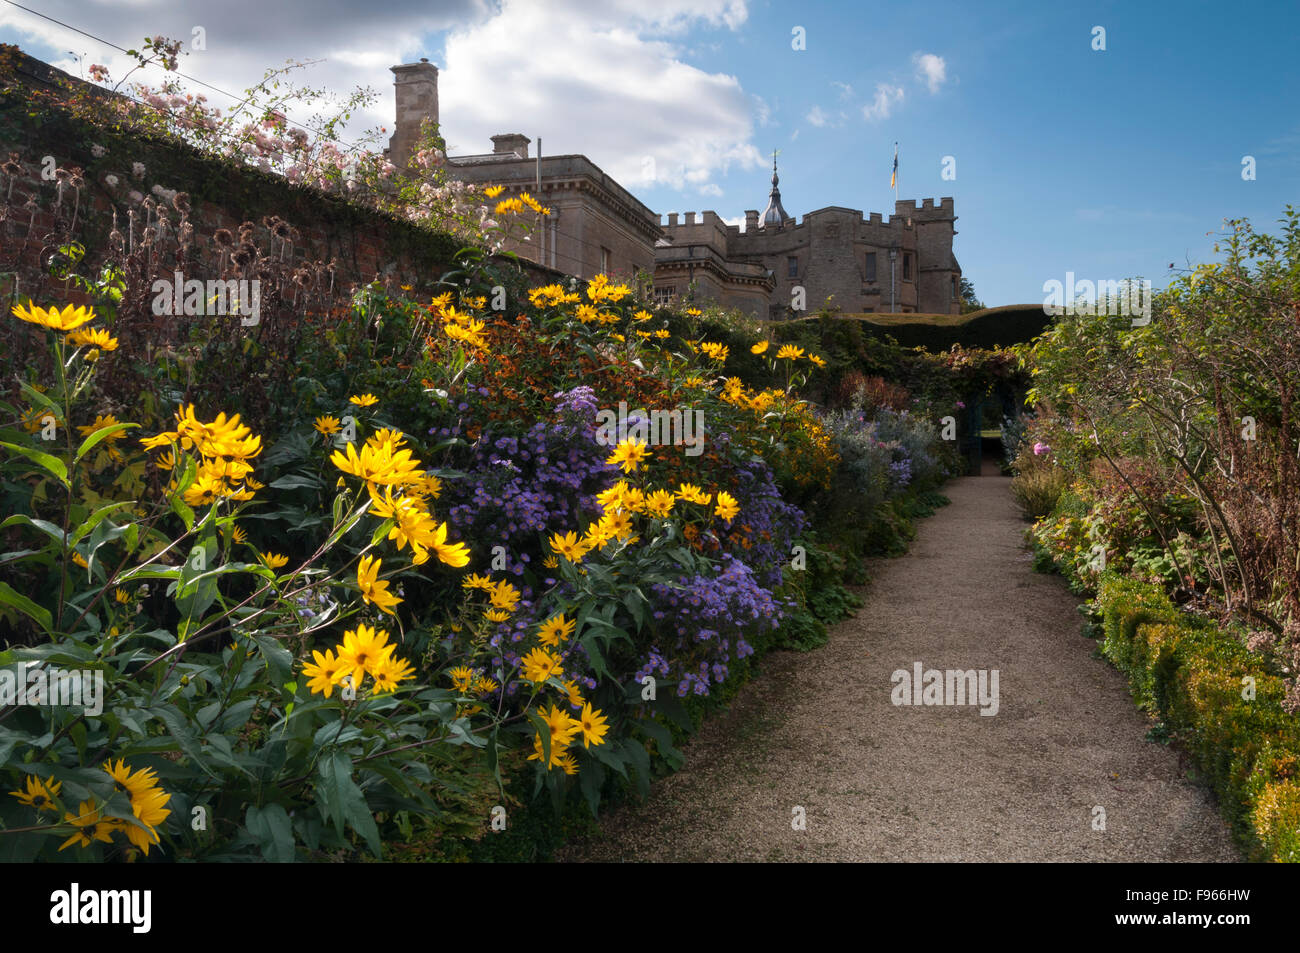 A colourful herbaceous border flowering in early October within the walled garden of Rousham House in Oxfordshire, England Stock Photo